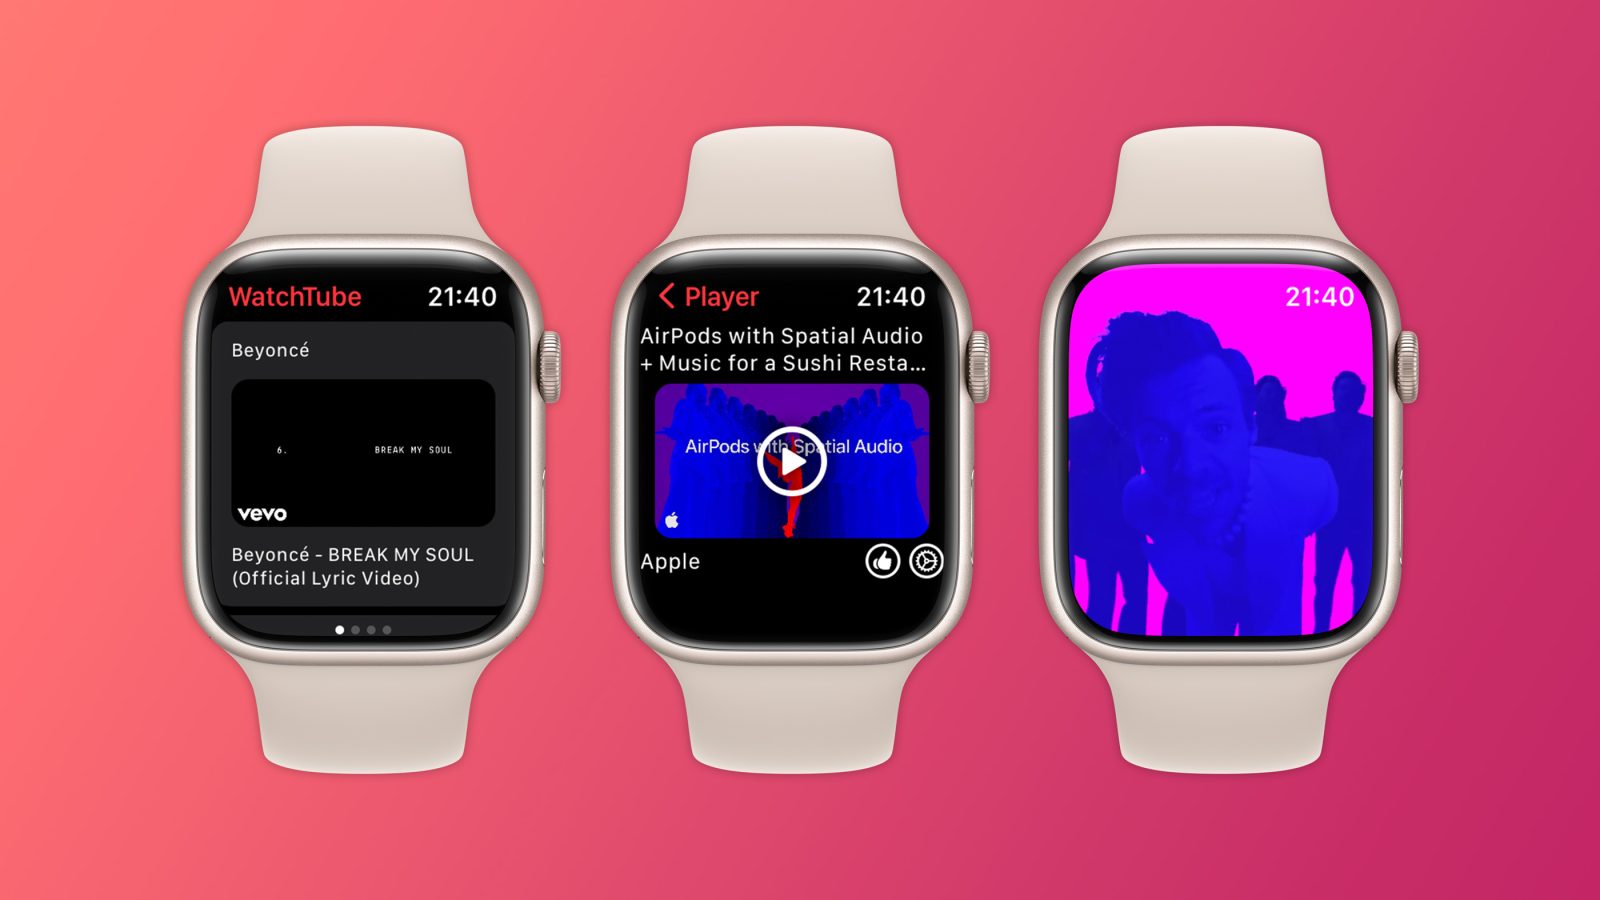 Watch Youtube Xxvedeos - Watch YouTube videos on your Apple Watch with WatchTube - 9to5Mac